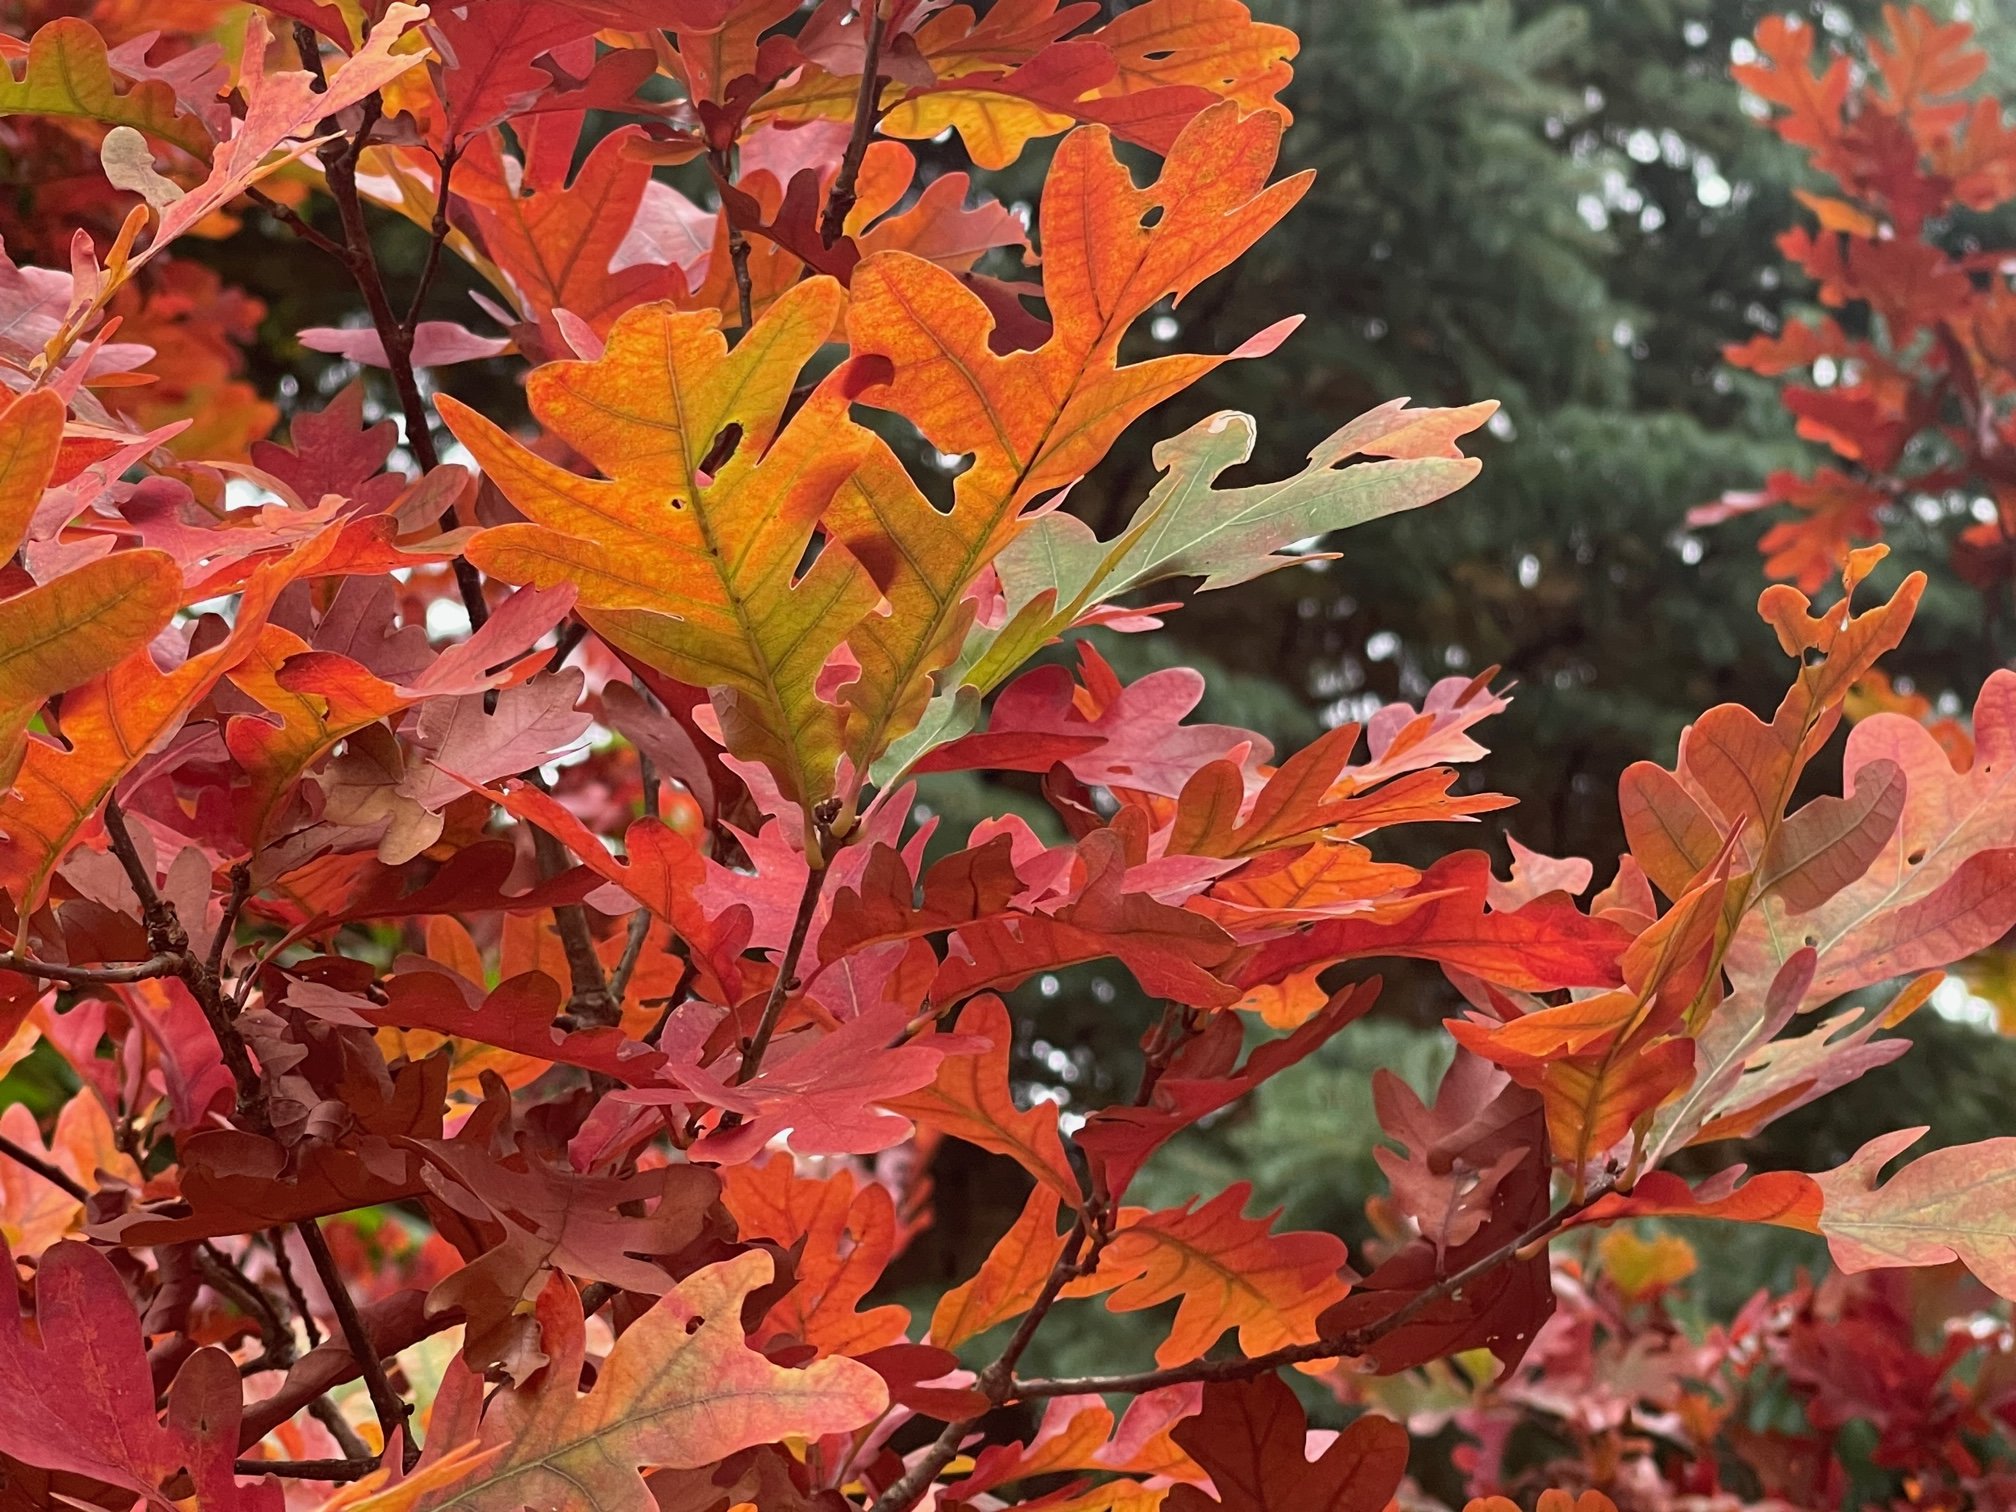 Theses gorgeous oak leaves show the beauty of these trees as the change from summer greens to glorious fall colours.